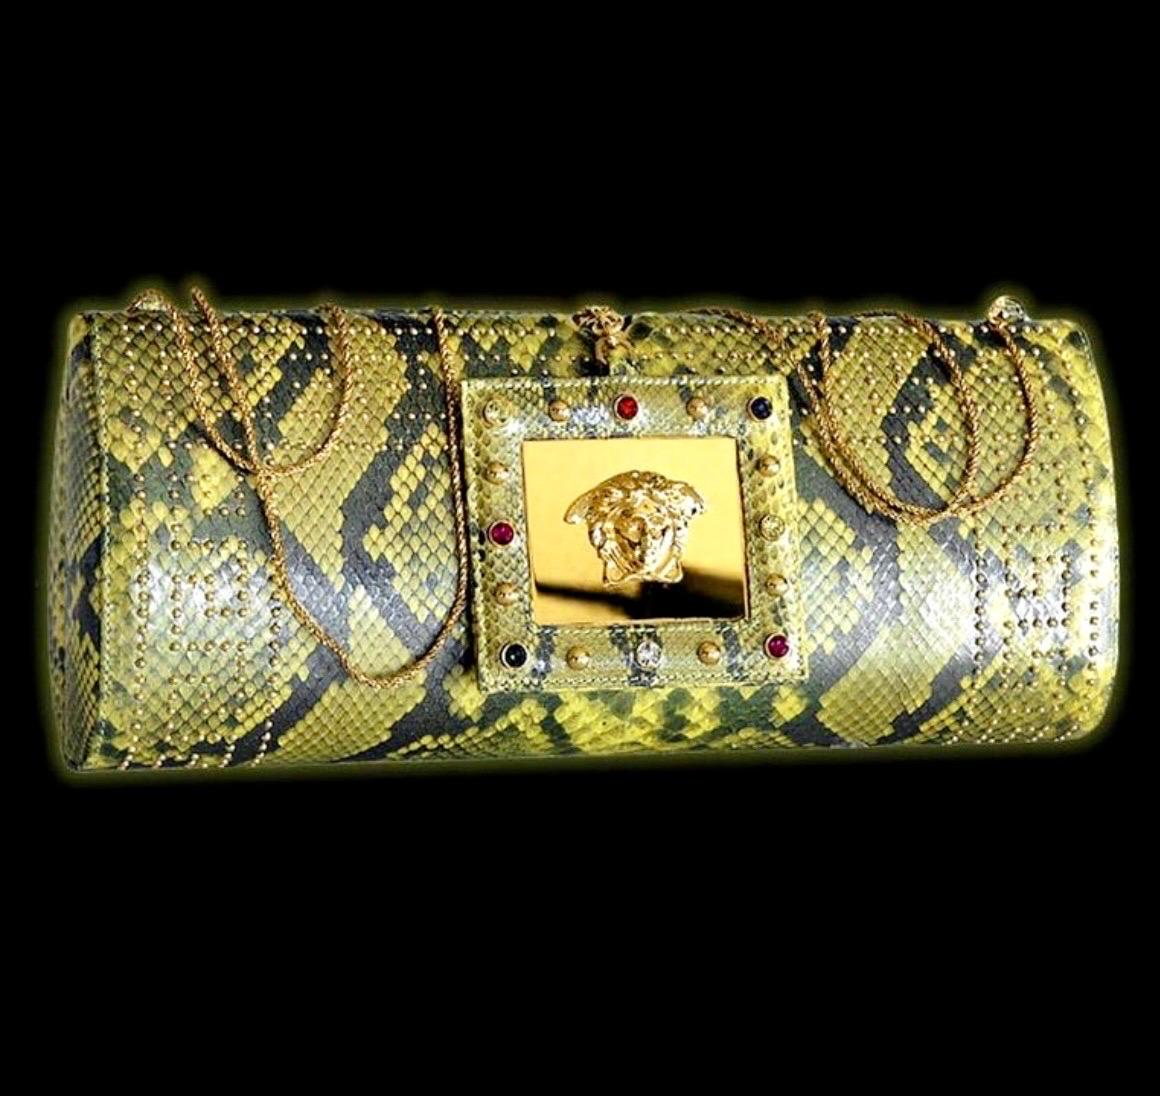 S/S 2000
Vintage Gianni Versace Python Clutch with gold-tone hardware, stud and crystal embellishments.
Yellow satin lining.
Removable Chain Shoulder Strap (Drop: 24